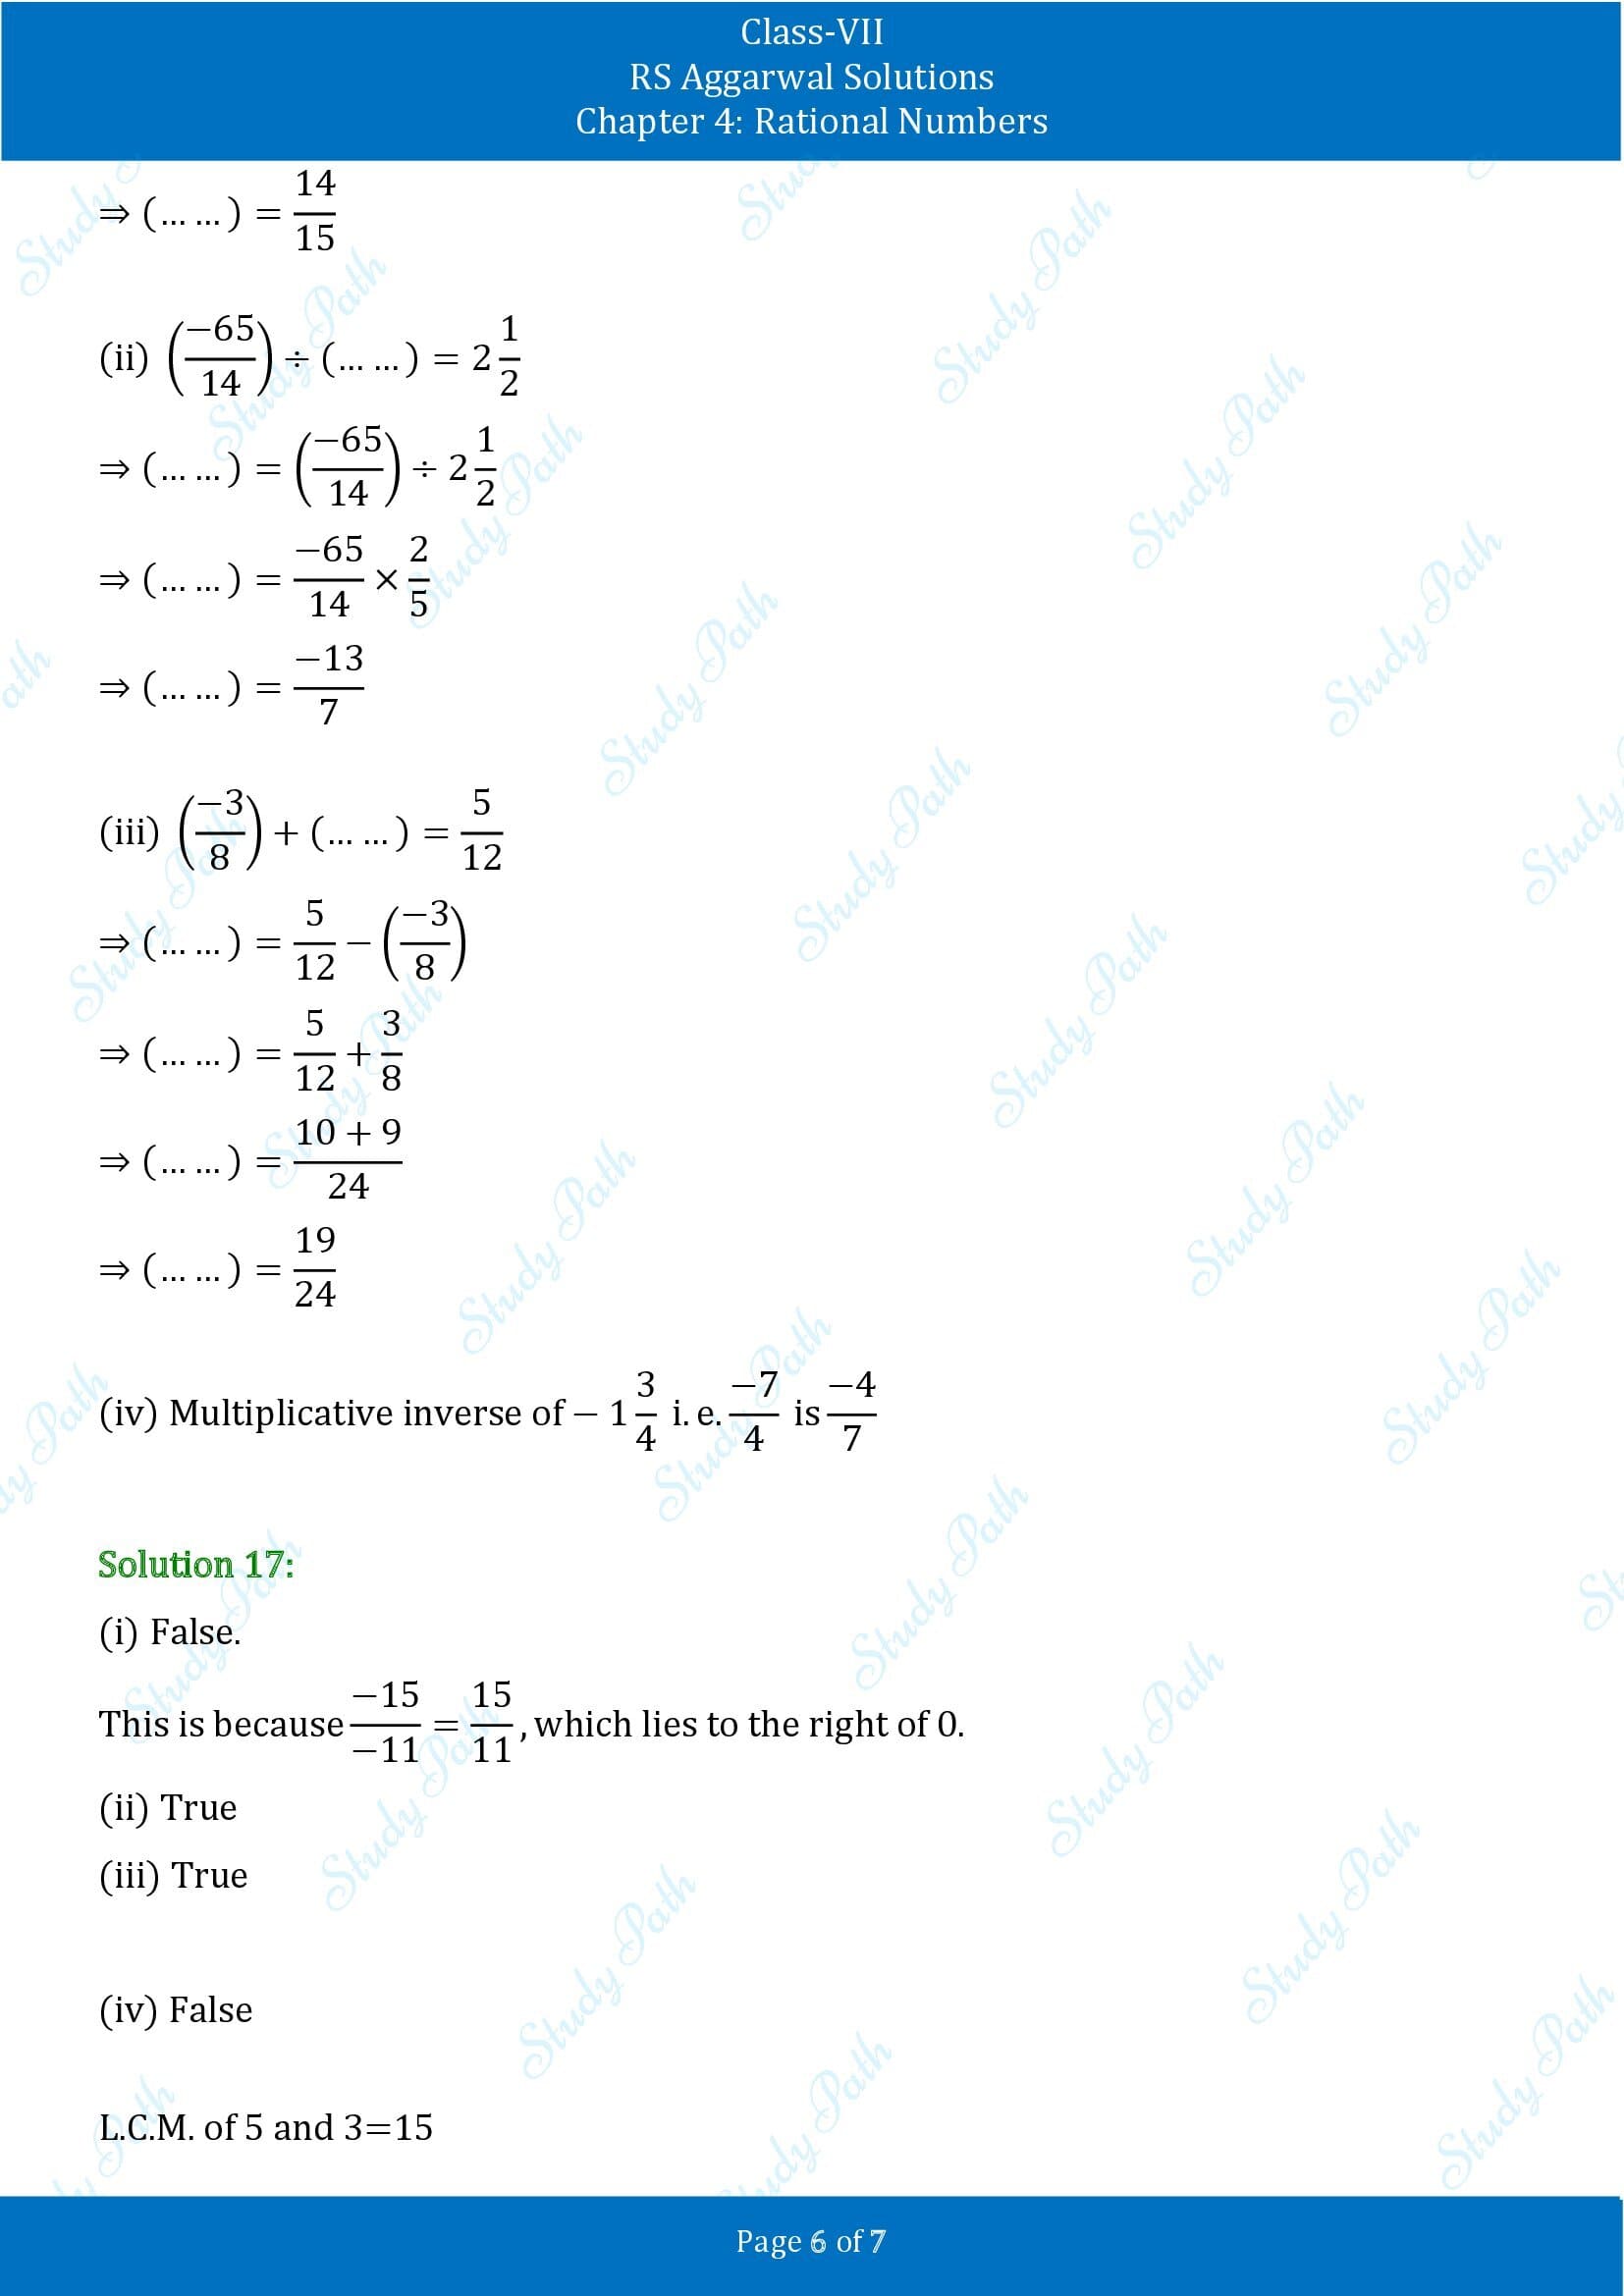 RS Aggarwal Solutions Class 7 Chapter 4 Rational Numbers Test Paper 00006